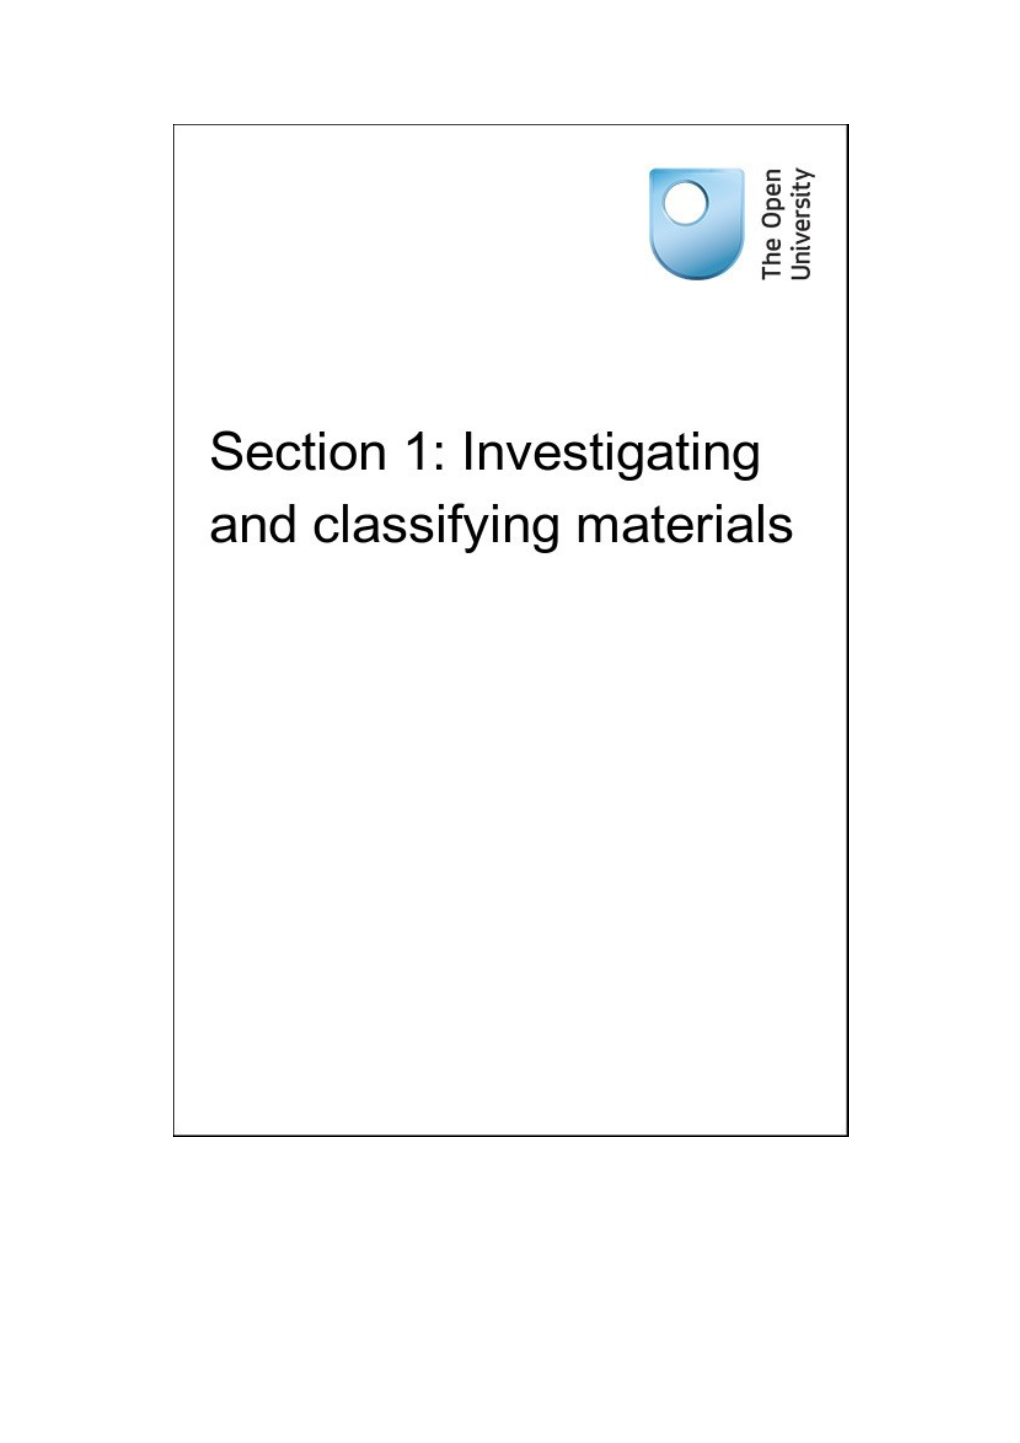 Section 1: Investigating and Classifying Materials